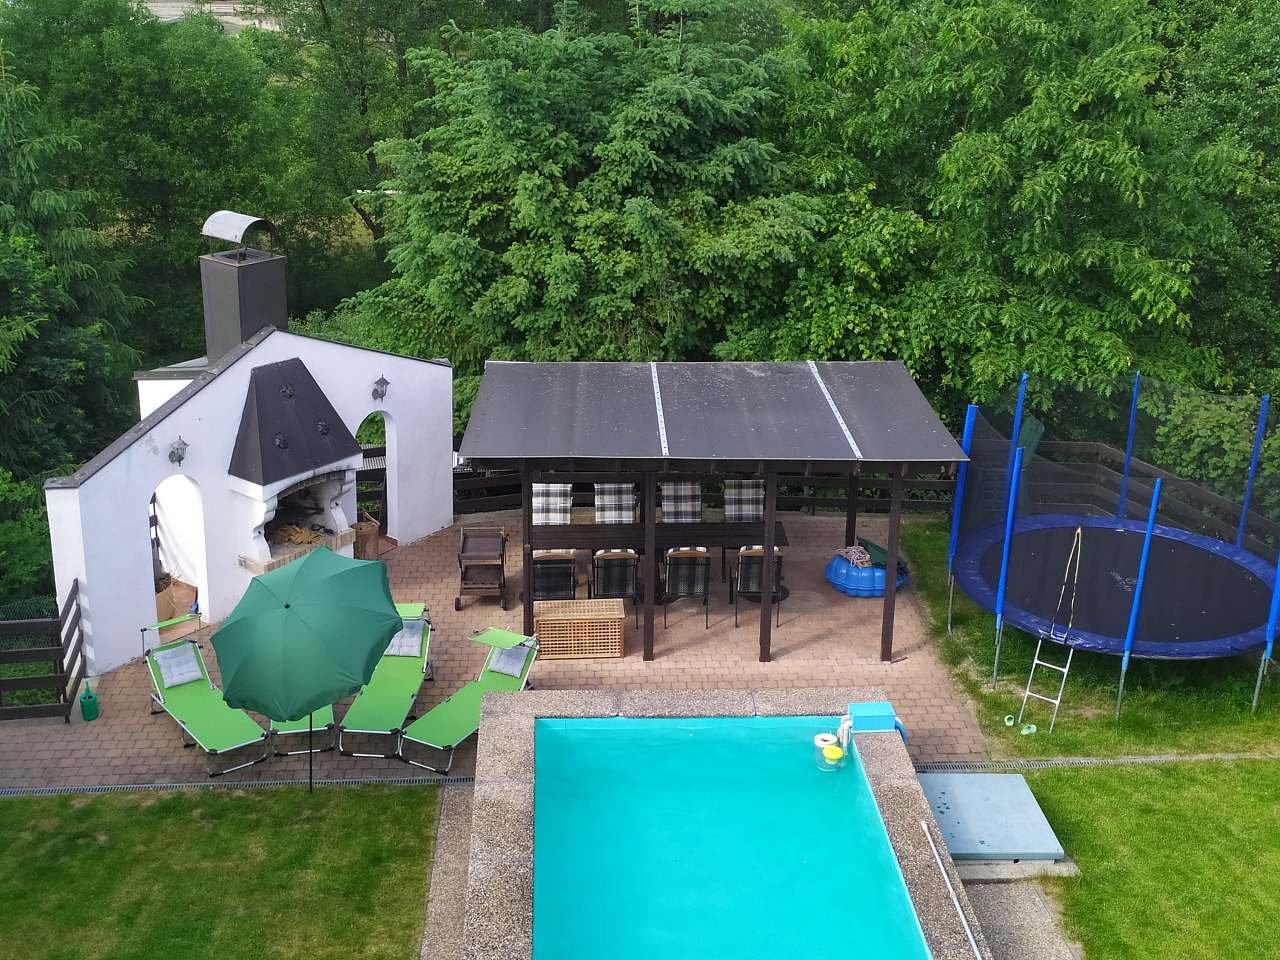 Garden facilities for use - swimming pool, pergola with fireplace, trampoline, sunbeds, etc.